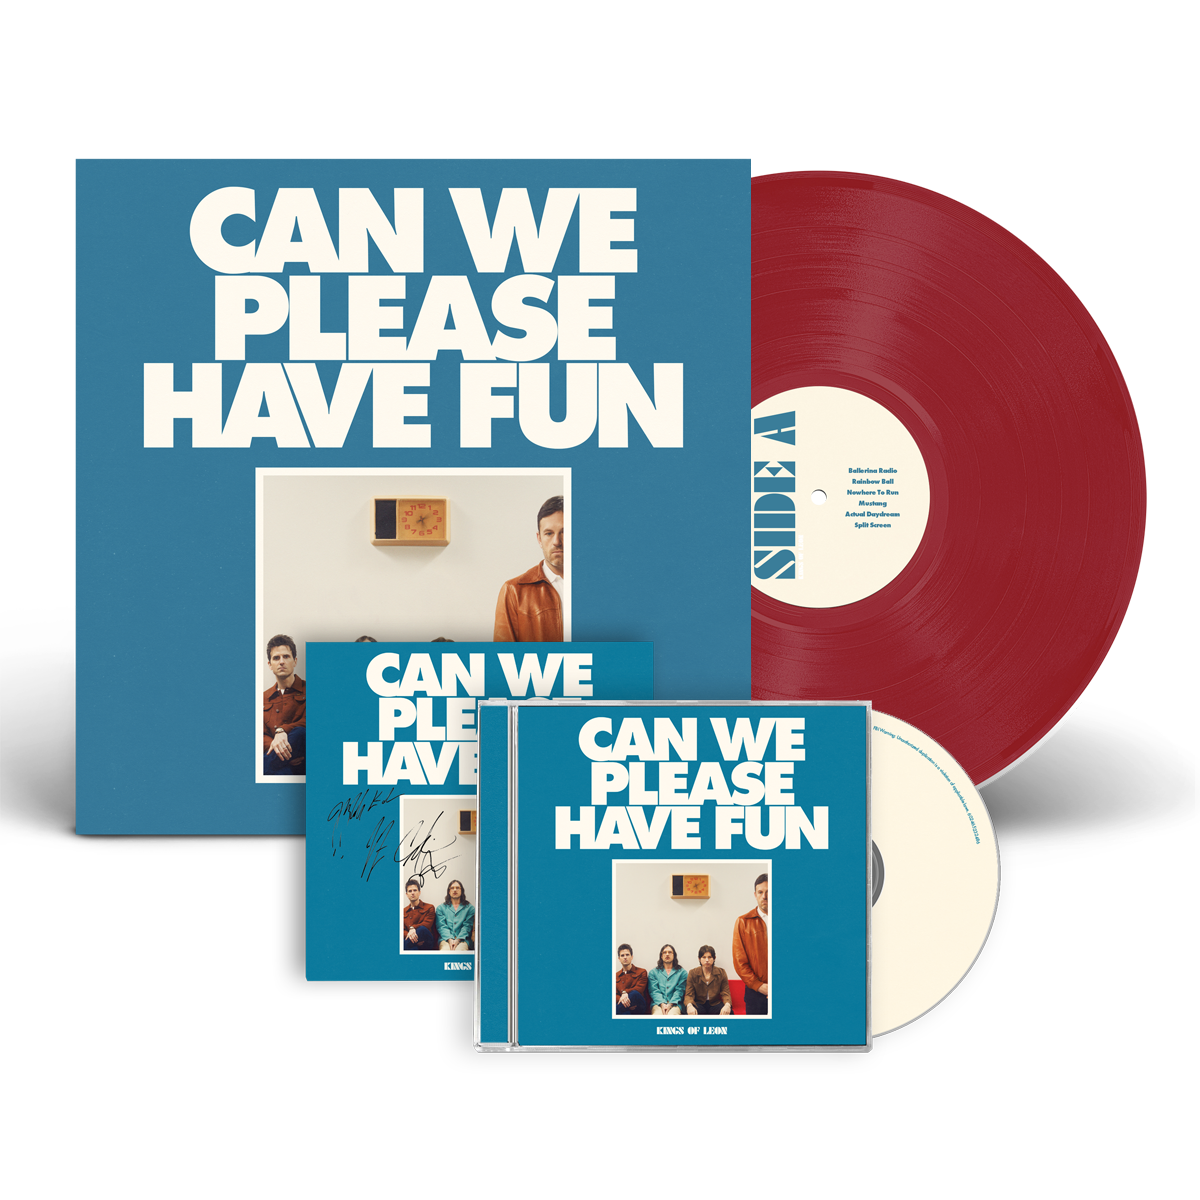 Can We Please Have Fun: Limited Red Vinyl LP, CD + Signed Art Card